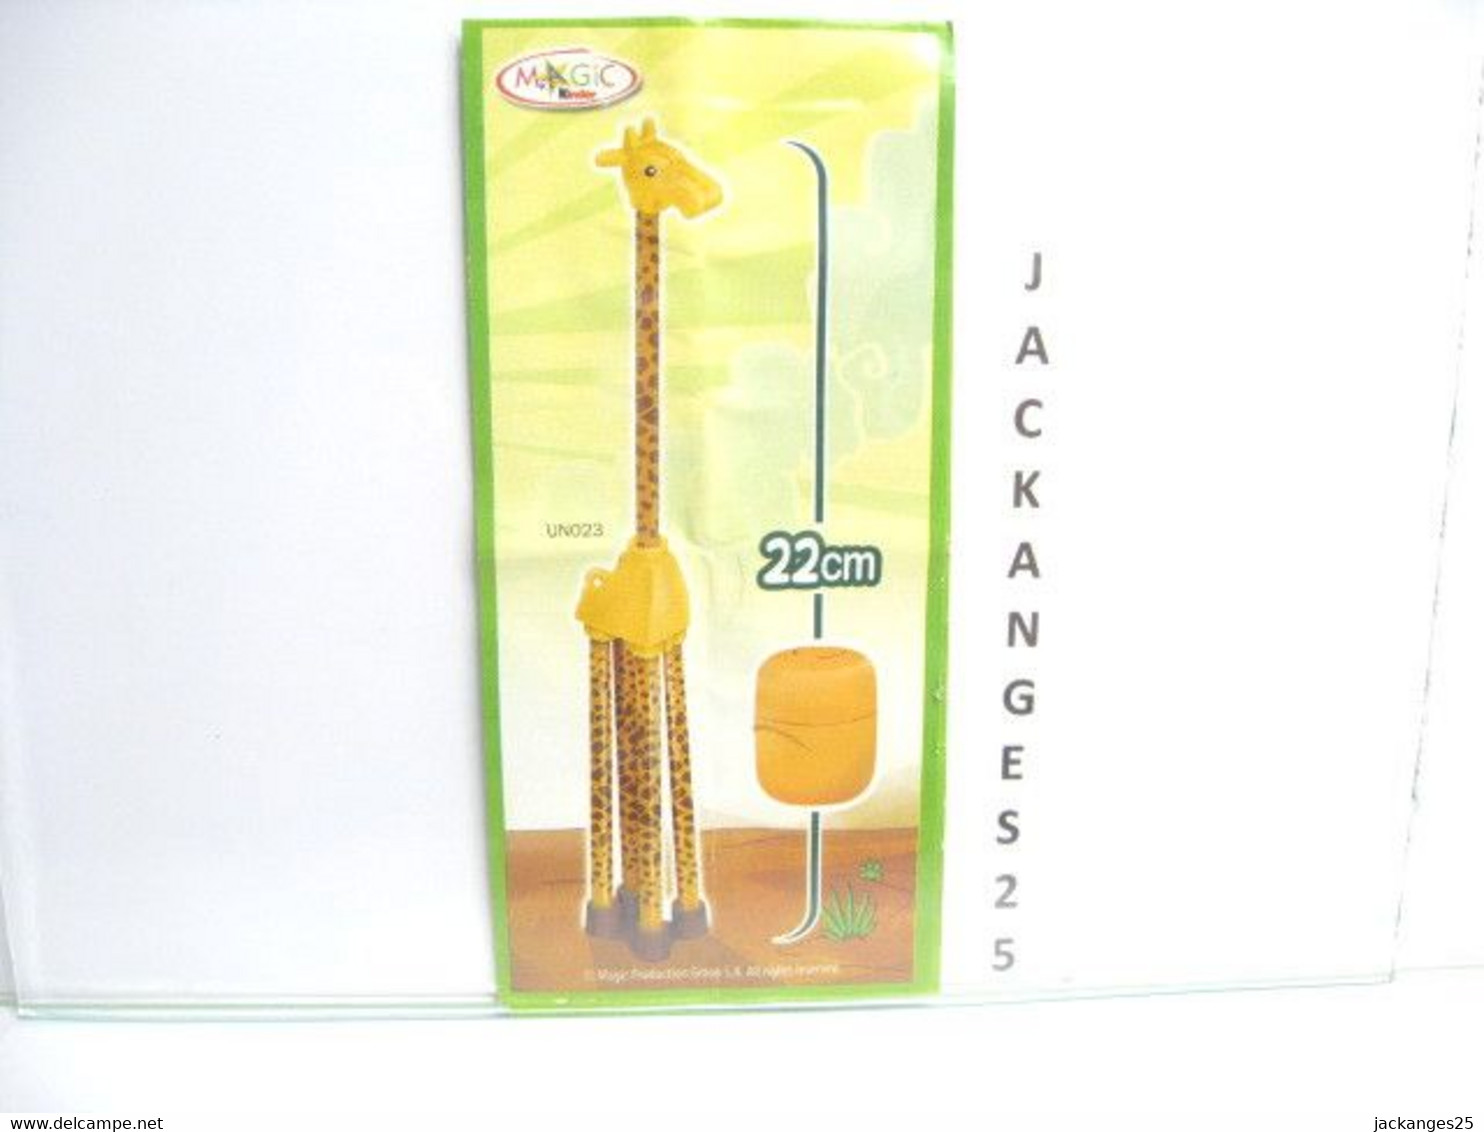 KINDER MPG UN 23 A GIRAFE  ANIMAUX NATURE NATOONS TIERE 2010  2011 + BPZ A - Families